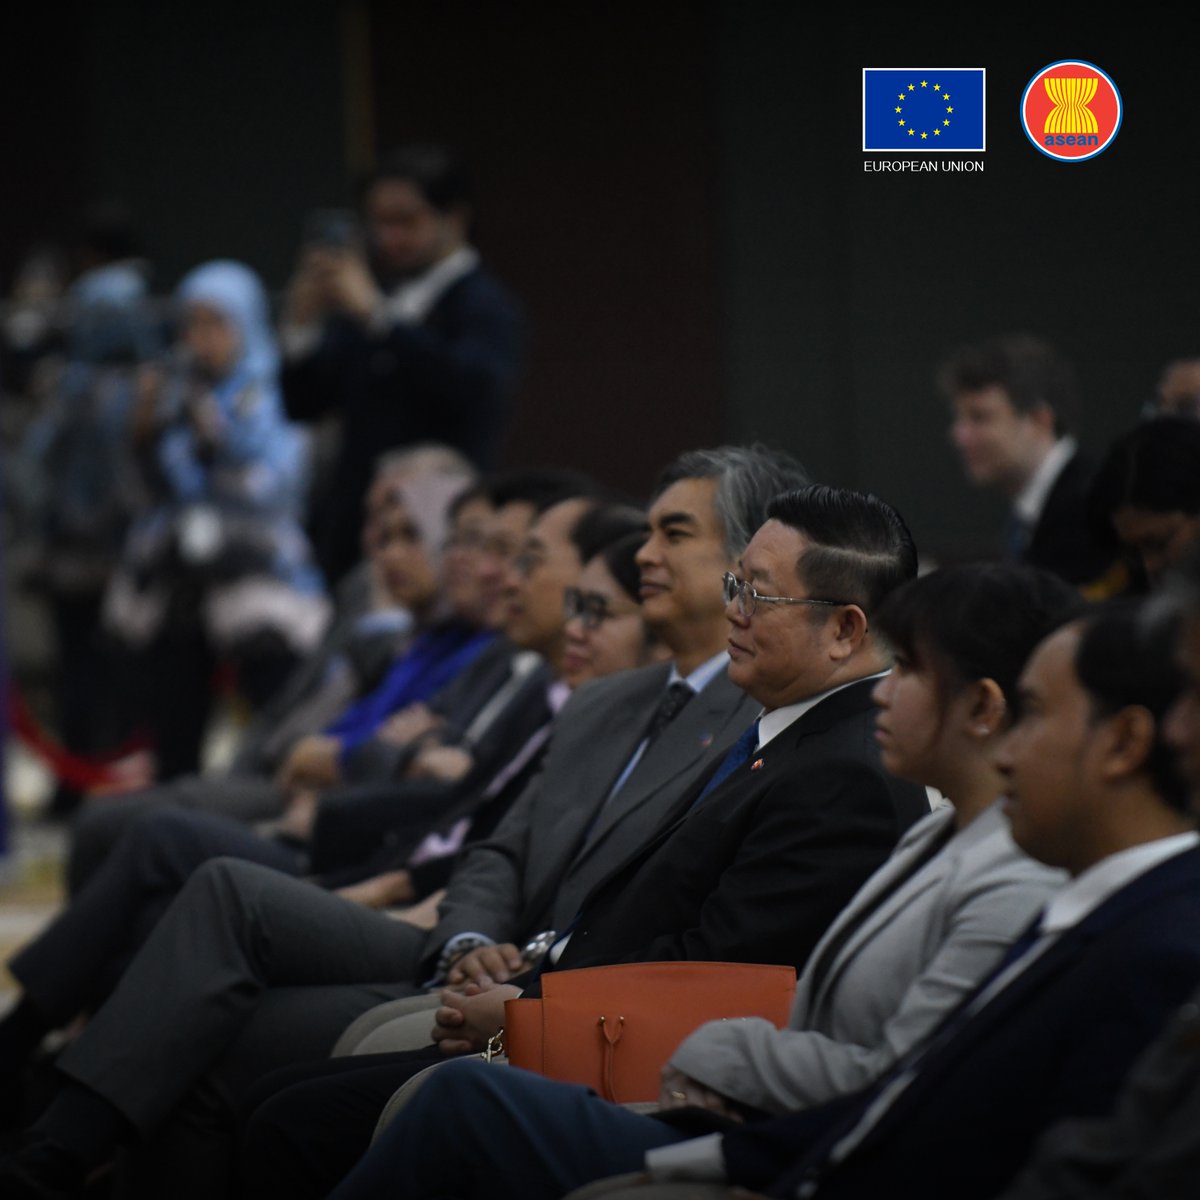 The launch event was also attended by Ambassadors from ASEAN and EU Member States, EU-ASEAN projects and media representatives.